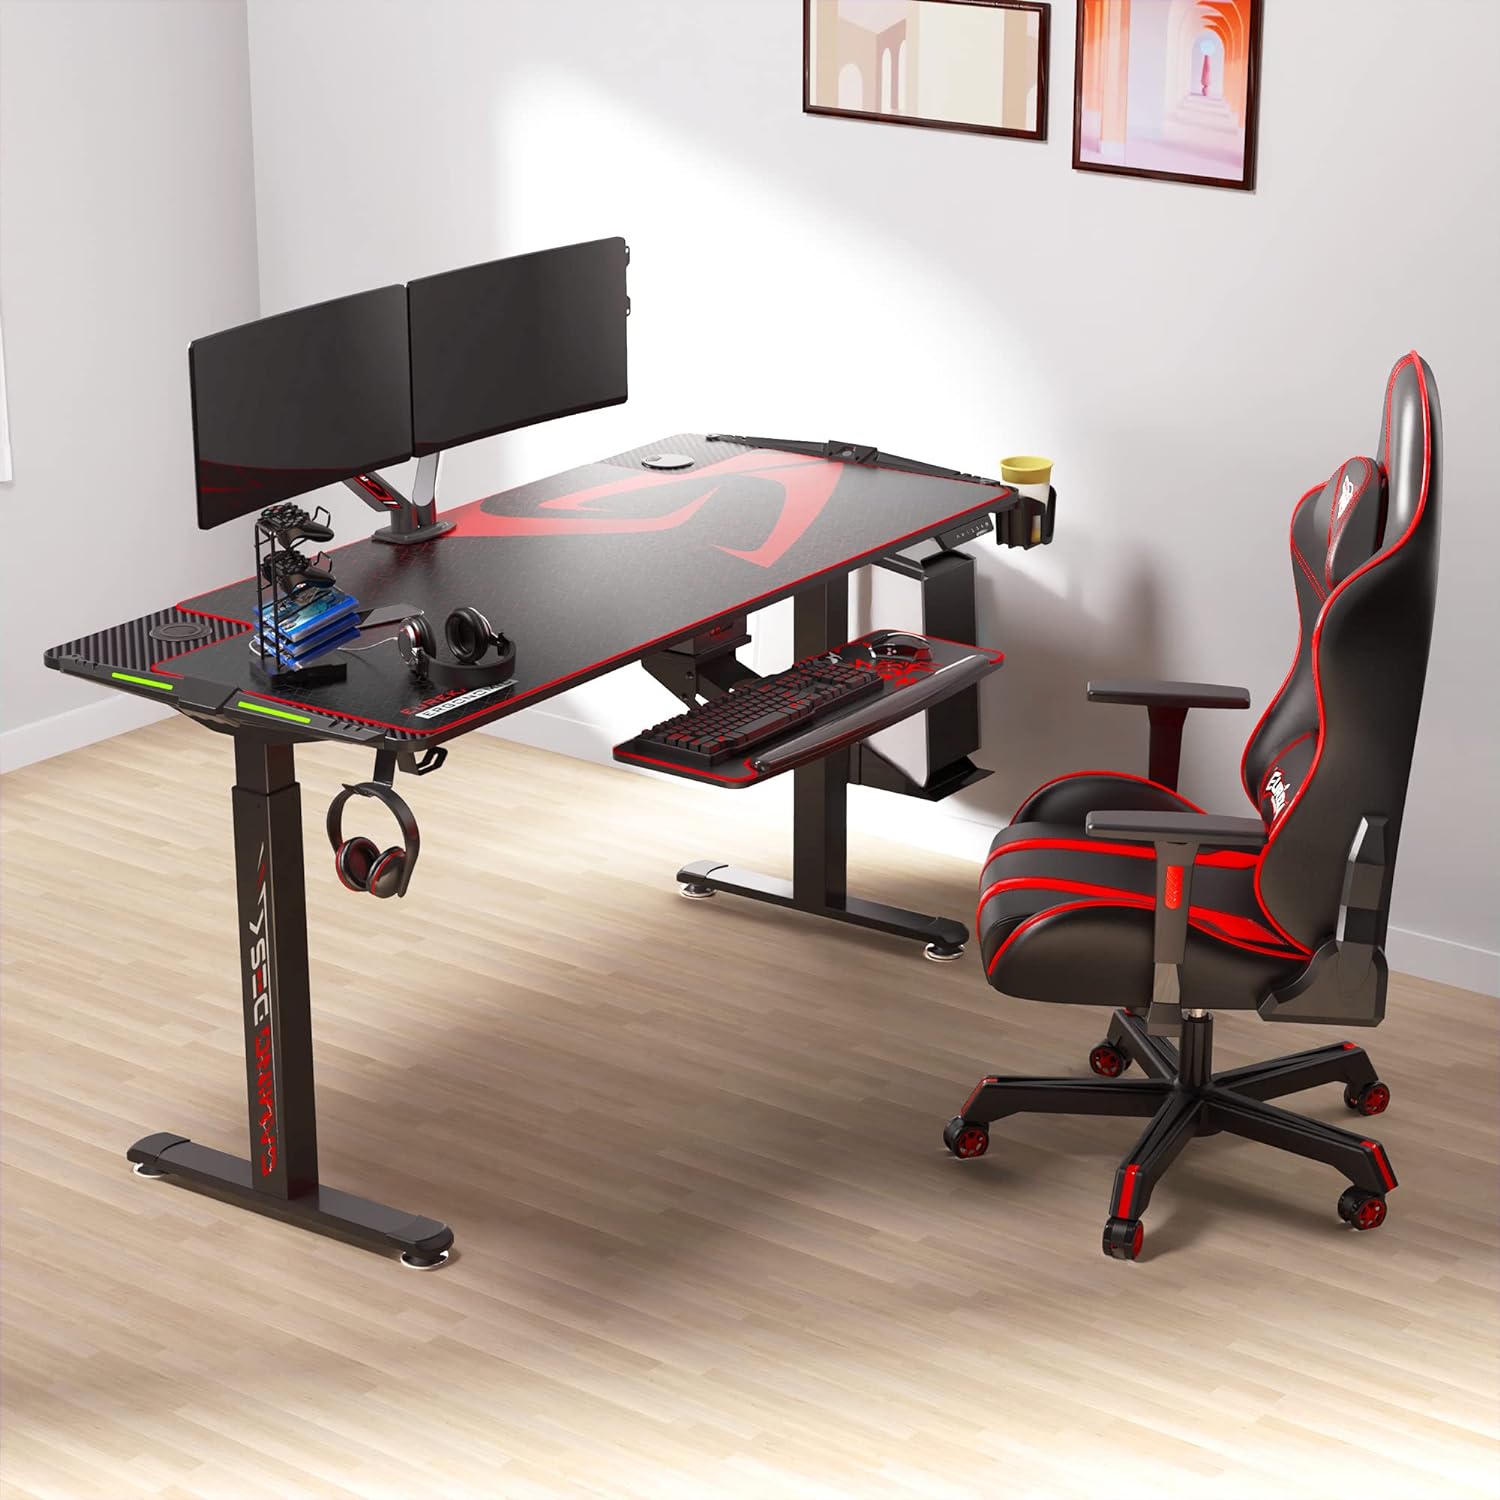 Eureka Ergonomic Gaming Table- 65 Inches, Electric Height Adjustable, RGB LED Lights With Luxury Gaming Chair